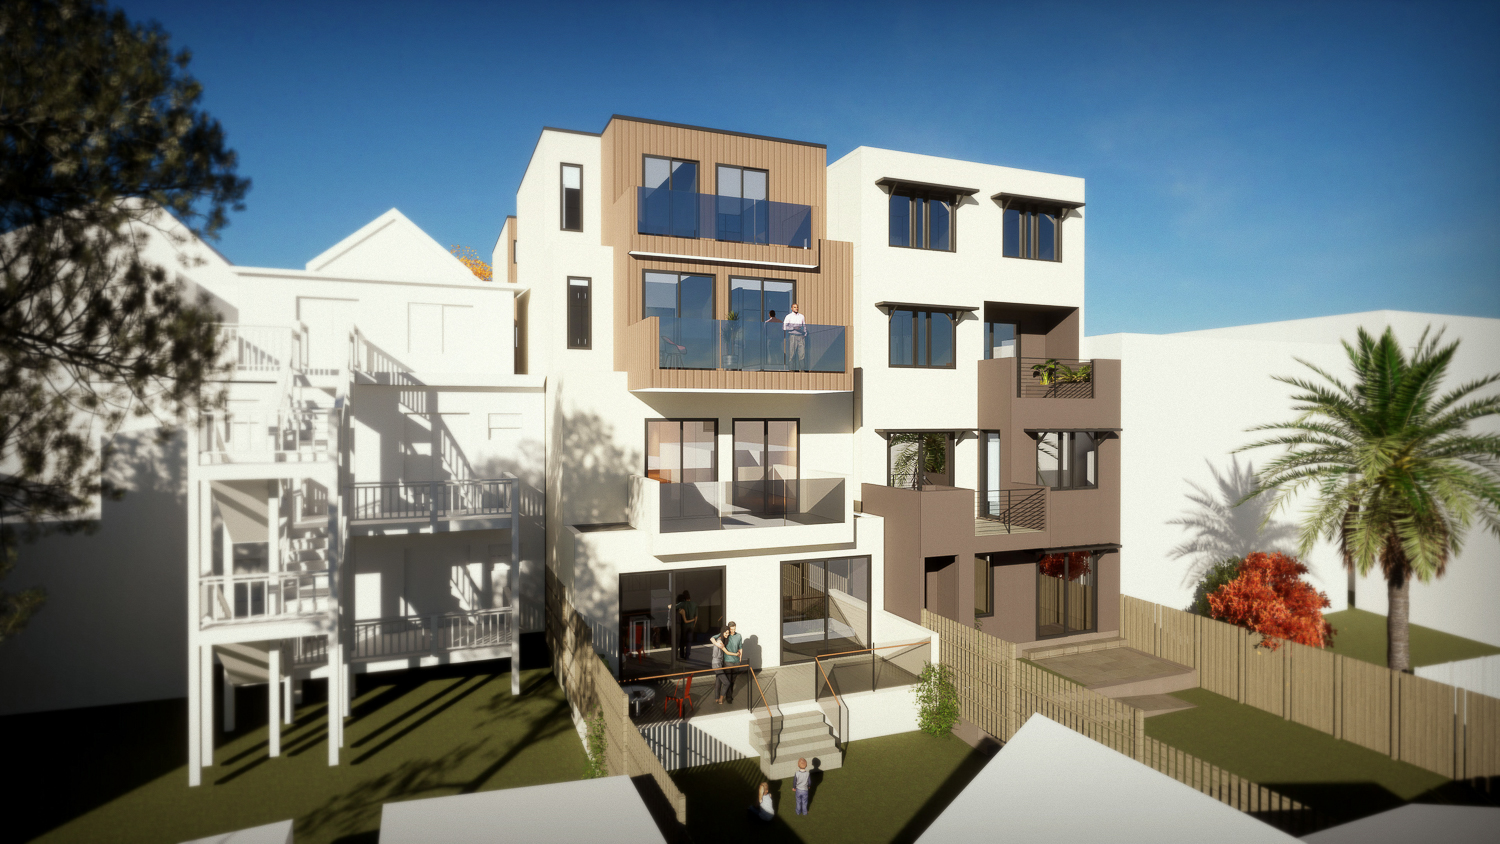 432 and 434 Cortland Avenue backyard perspective, rendering by DNM Architecture